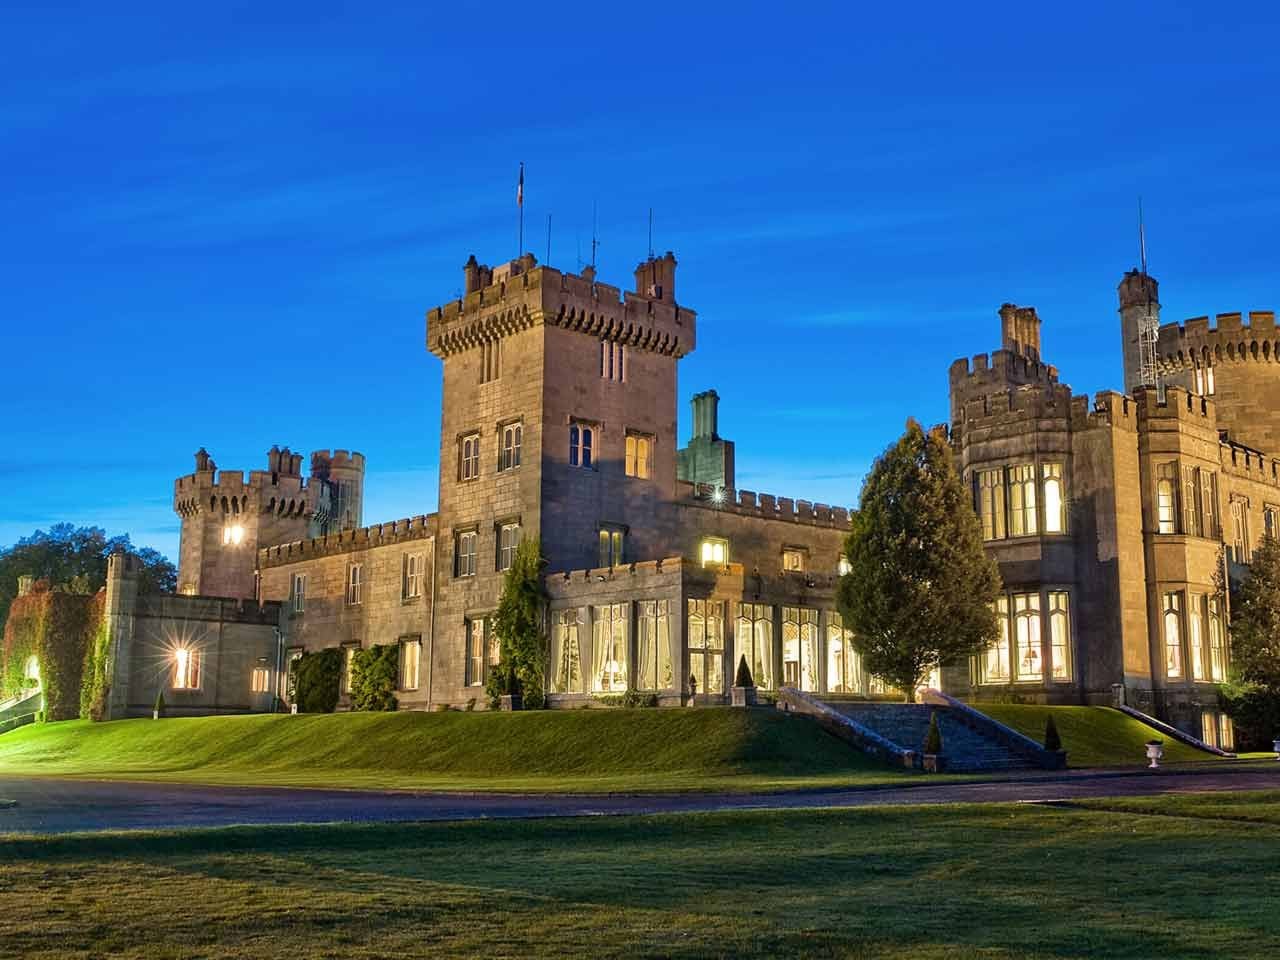 Dromoland Castle - One of Europe's finest hotels